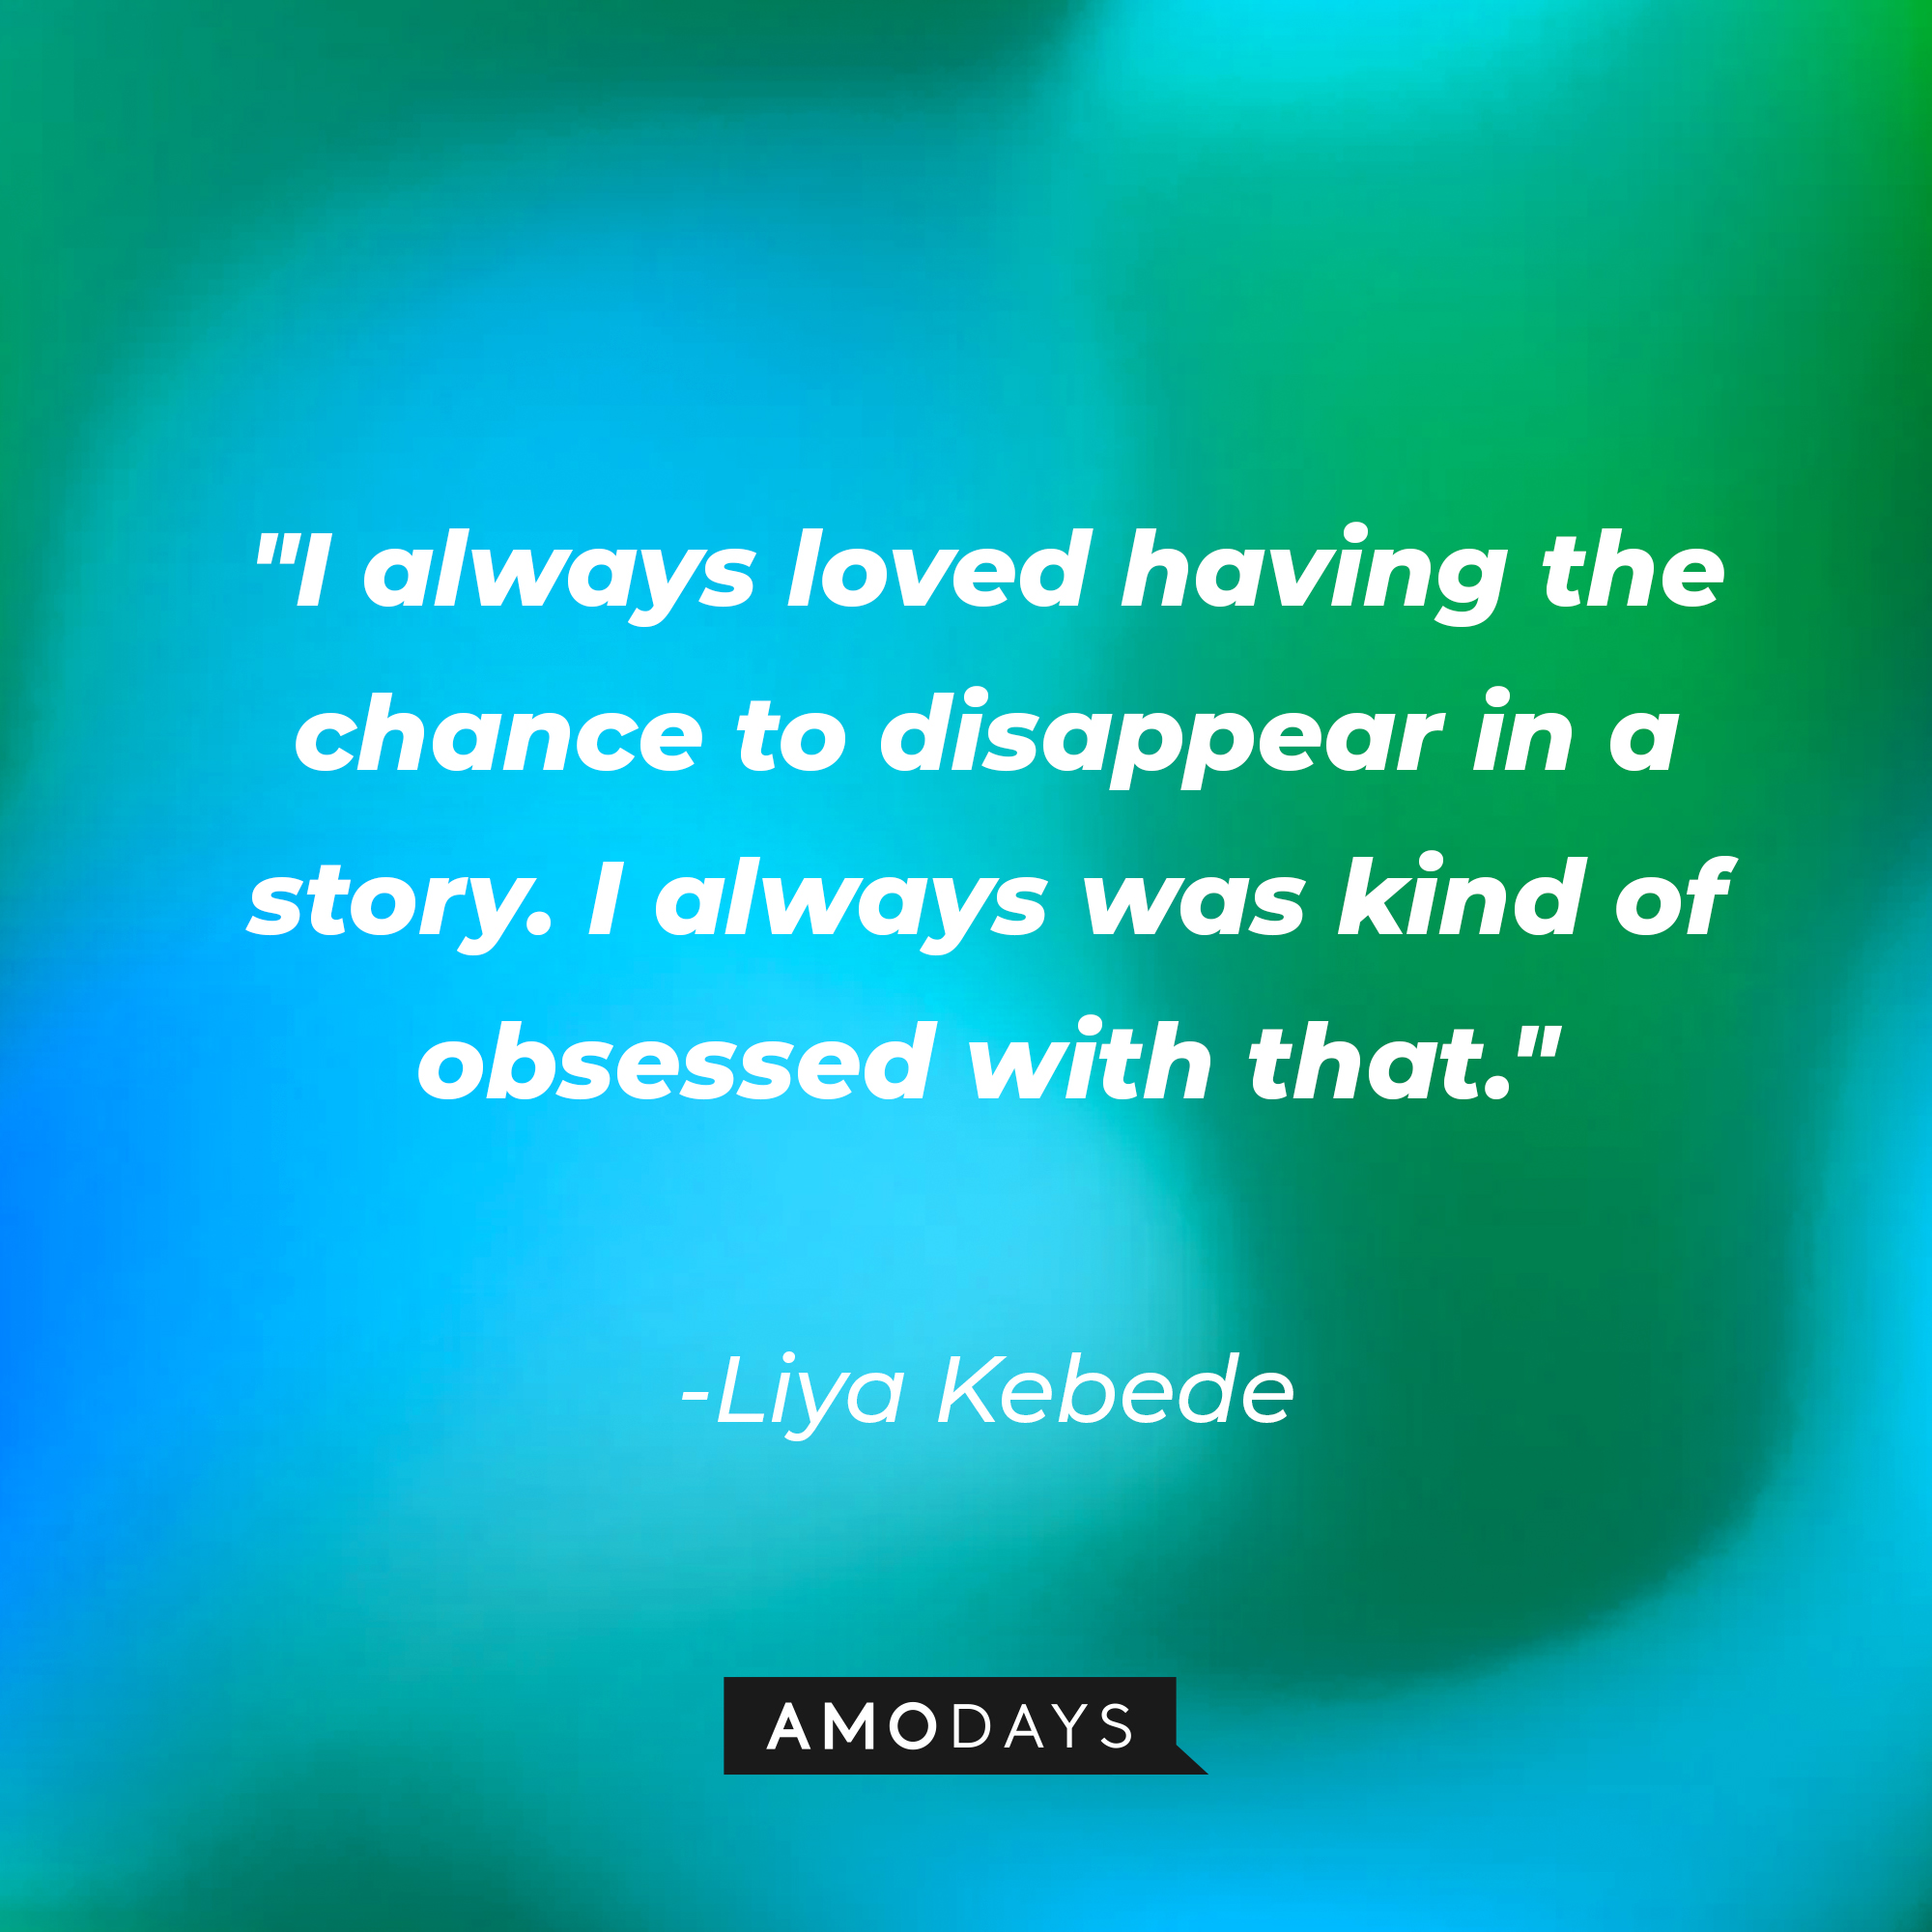 Liya Kebede's quote: "I always loved having the chance to disappear in a story. I always was kind of obsessed with that." | Image: AmoDays